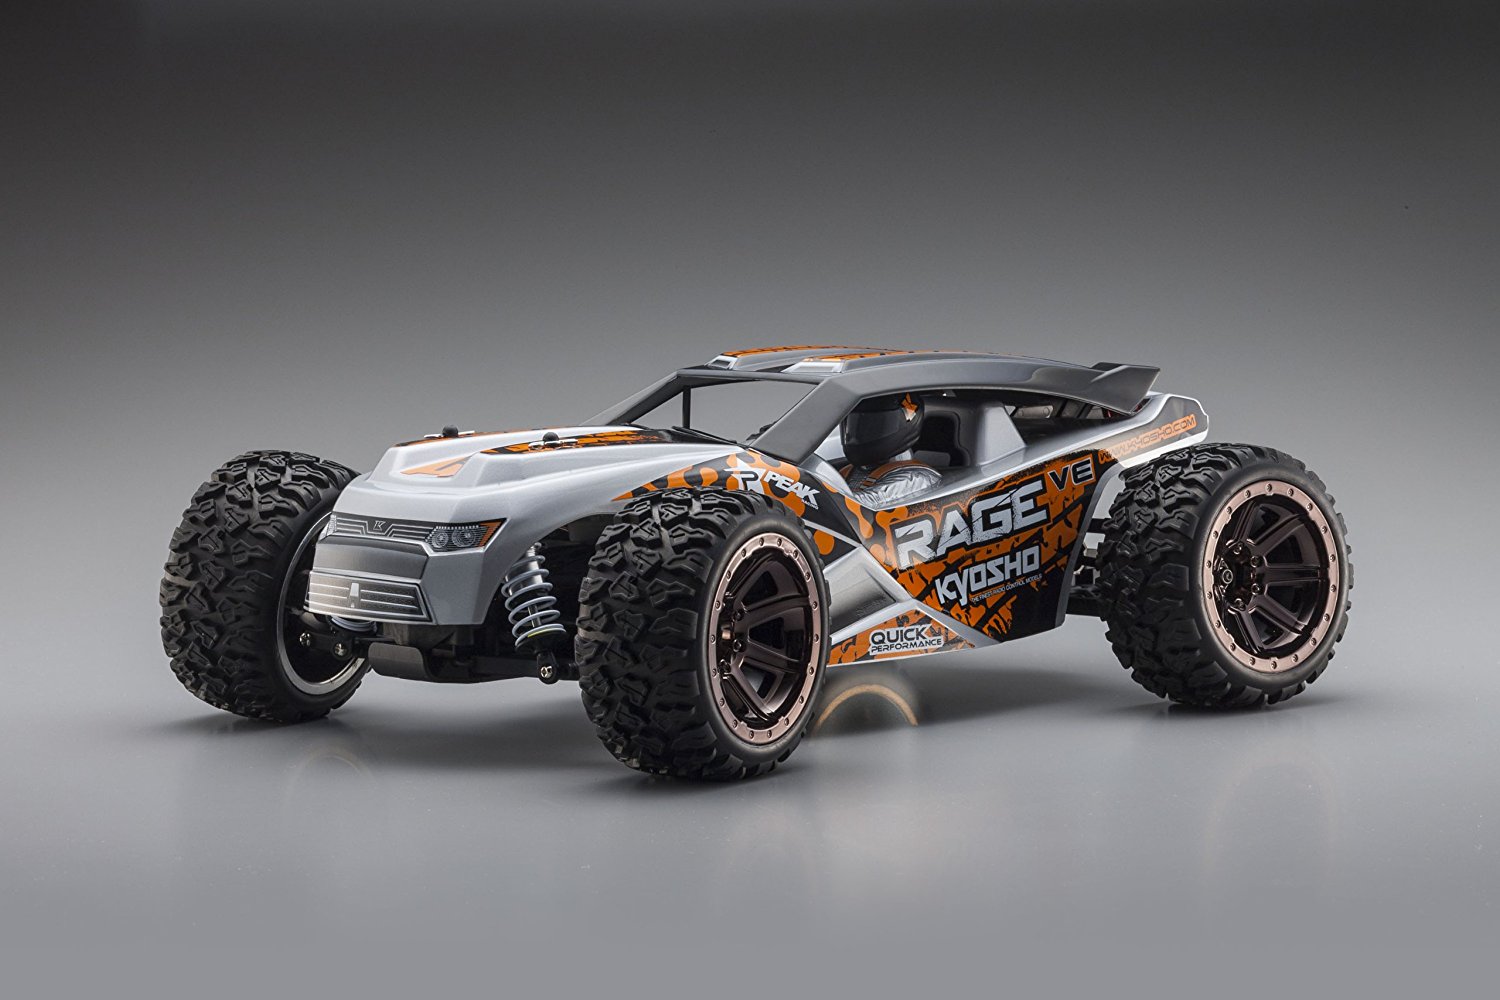 Kyosho EP 4WD R/S RAGE VE Truck (1/10 Scale)